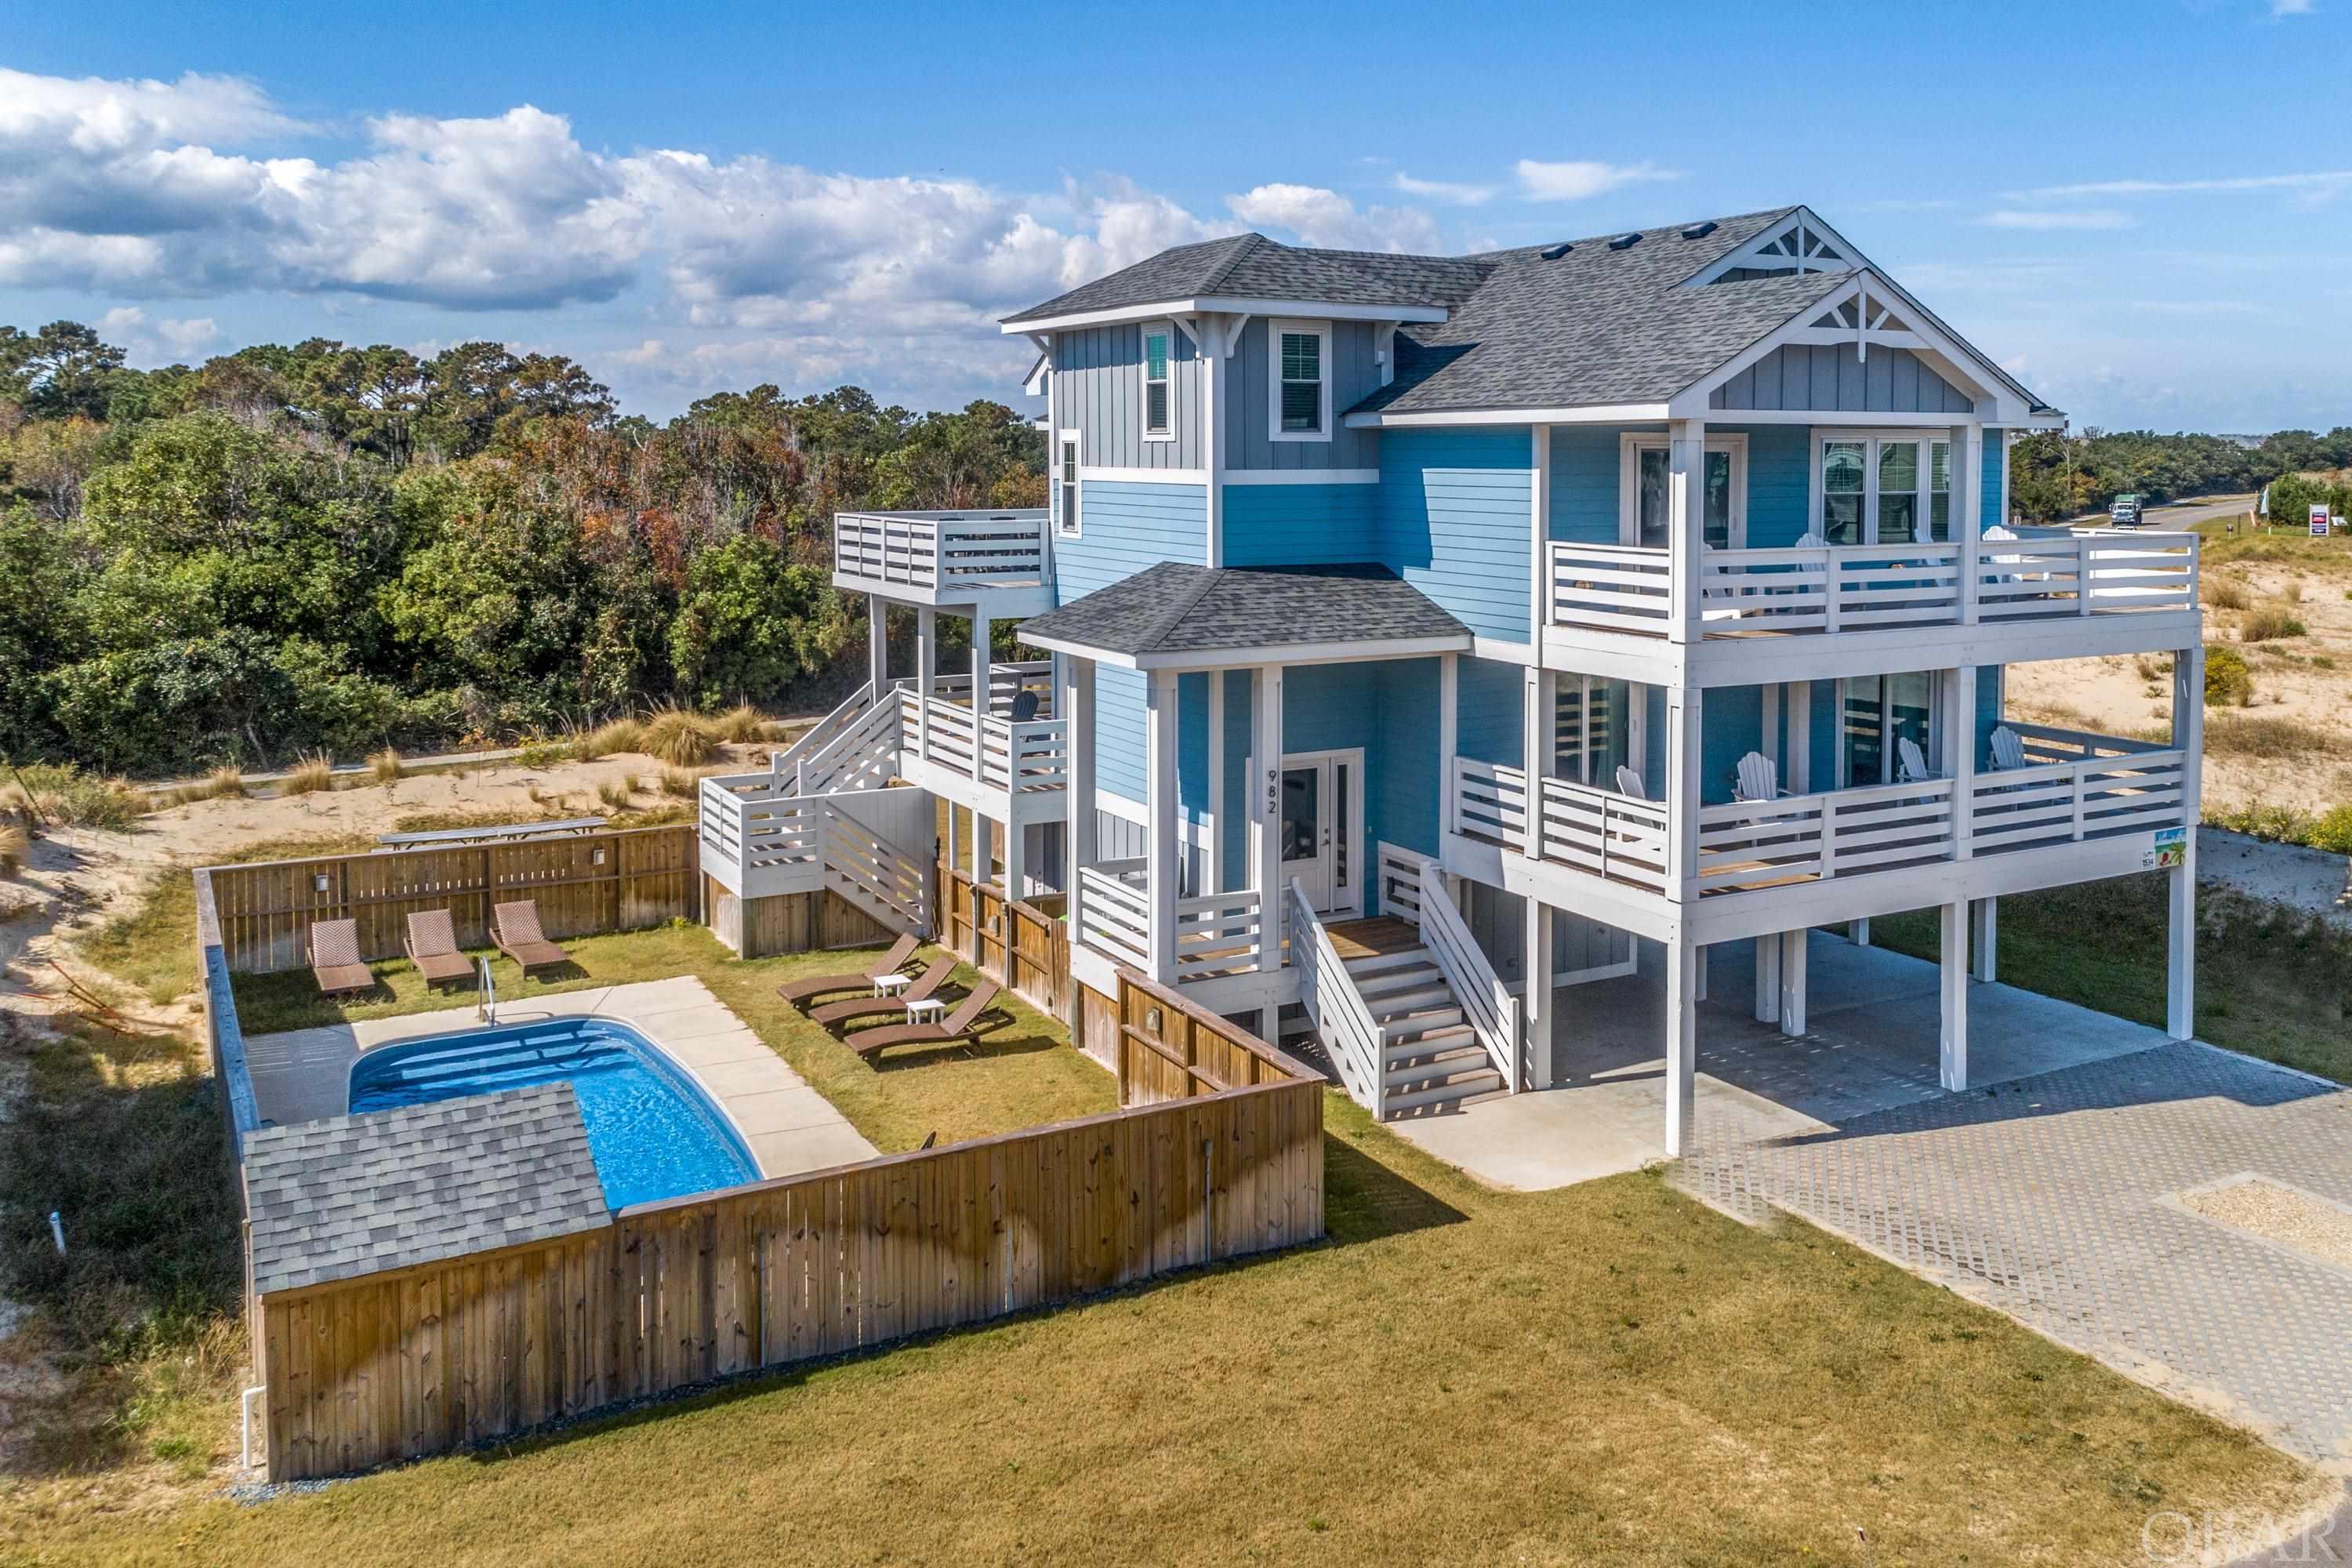 This handsome home was completed in November 2020 - Elevator, granite, wood floors, private pool! And it is an easy walk to the beach in Whalehead with the Perch walkway about 75' from the house.  The open concept living includes the living, dining and kitchen for ultimate family gatherings. You will love the huge kitchen with beautiful granite countertops, soft close, white-painted cabinets and stainless steel appliances. The large east deck off living area is partially covered for protection and gives a glimpse of the ocean.  There is the primary bedroom with ensuite bath with two sinks and custom tiled shower. Down the hall is a nice southwest deck for evening sunsets.  A work space was created in the loft. Grab the elevator and head down to the mid level which has 2 bedrooms with ensuite baths along with another bath and 2 more bedrooms. All 4 of these bedrooms have direct deck access. The ground level has a rec room with kitchenette that gives access to the private pool and back yard.  Rents in 2022 were limited to 10 summer weeks & owner saw income of $69,054! Laminate wood flooring throughout except baths are LVP, tiled showers, rec room has mini split for maximum efficiency, LP Smart Siding, and is about 500 yards to beach.  Located on the oceanside of Monteray Shores, this home gives you the best of both worlds! This street happens to have a number of year round residents.  Enjoy community amenities at the Clubhouse with large pool, tennis courts a playground and boat ramp and a great community for walking and bike rides.  Close to restaurants and shops and the historic Corolla community with Lighthouse and Whalehead Club.